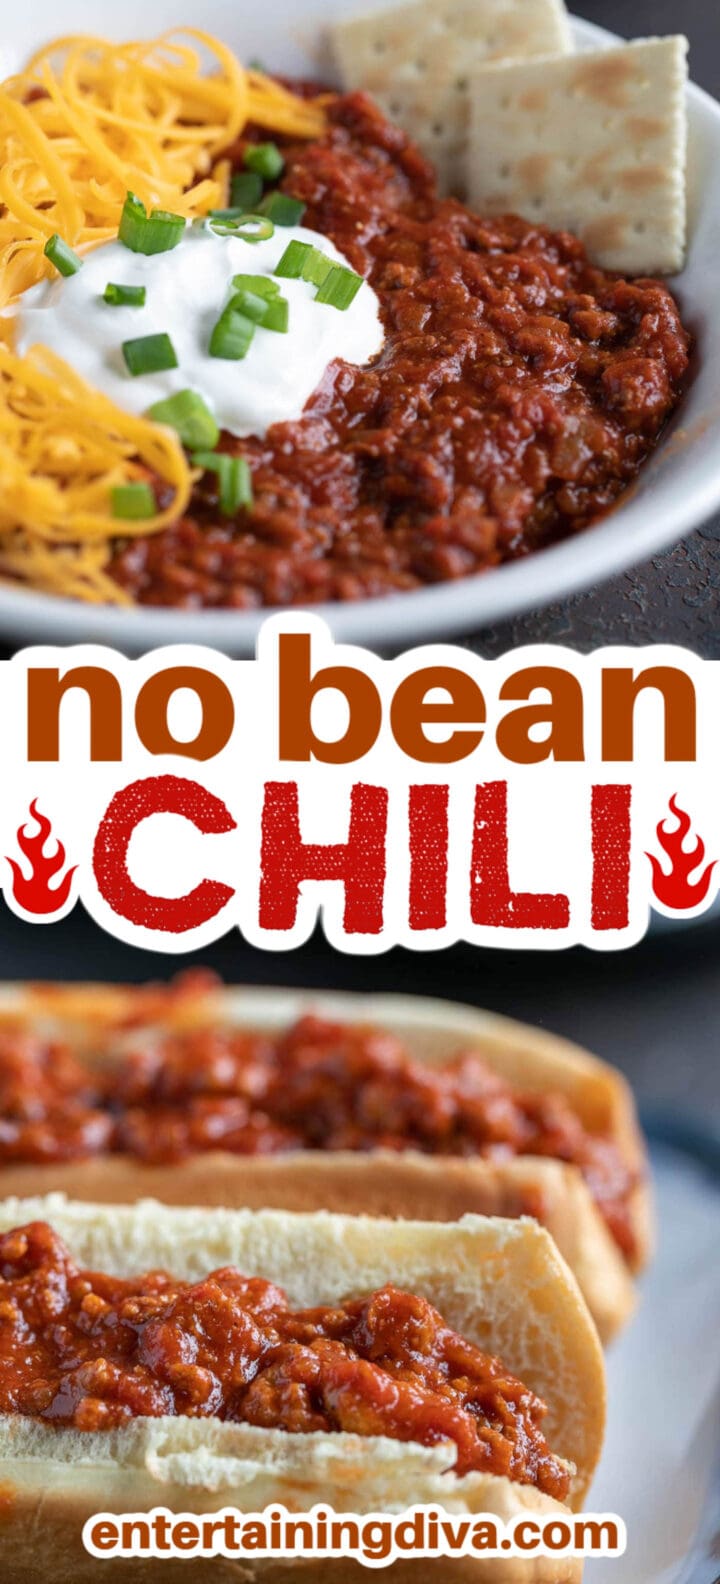 No bean chili with turkey and cheese.